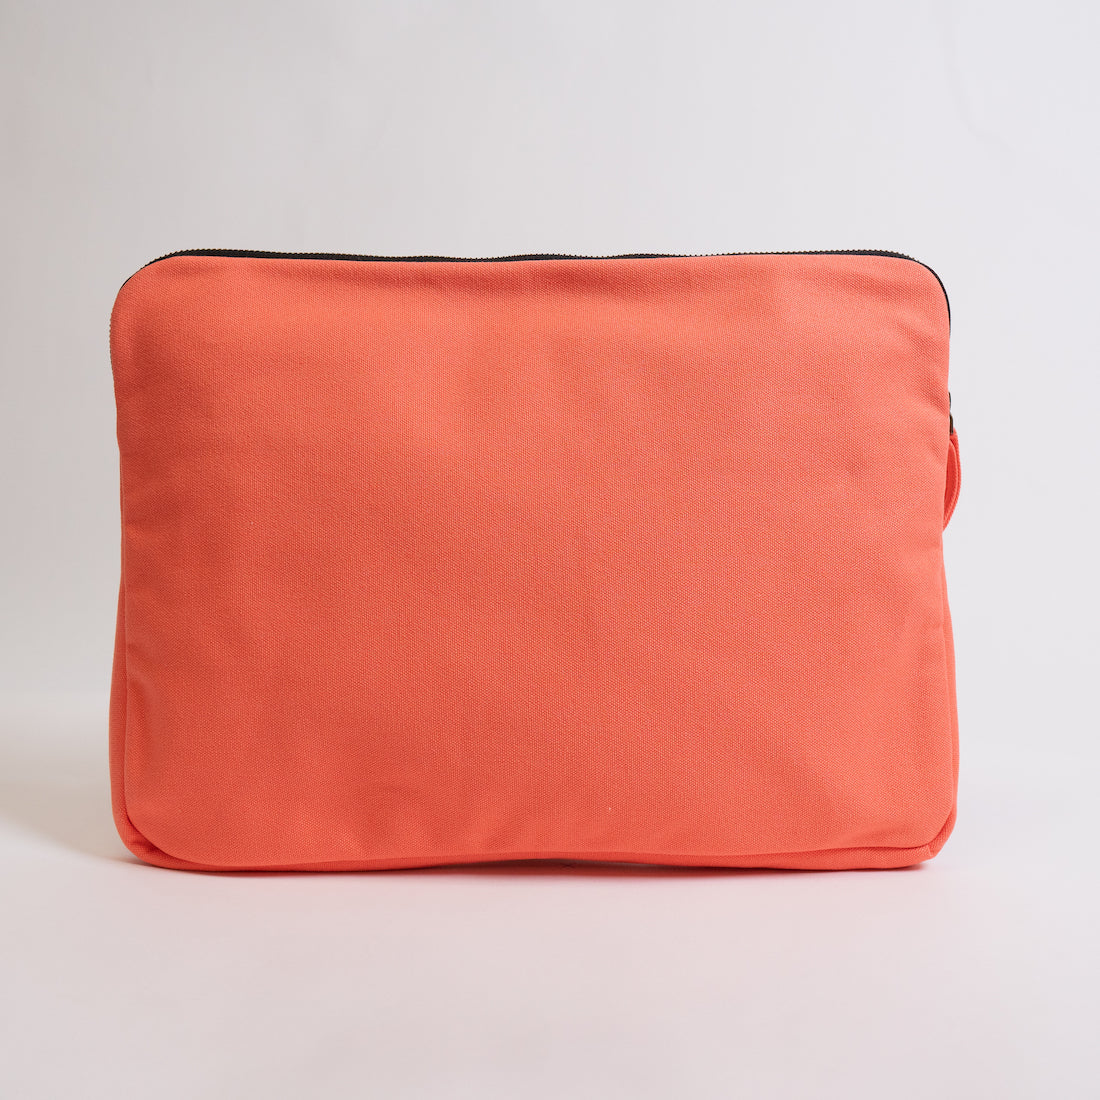 15 inch laptop sleeve with zippered pocket